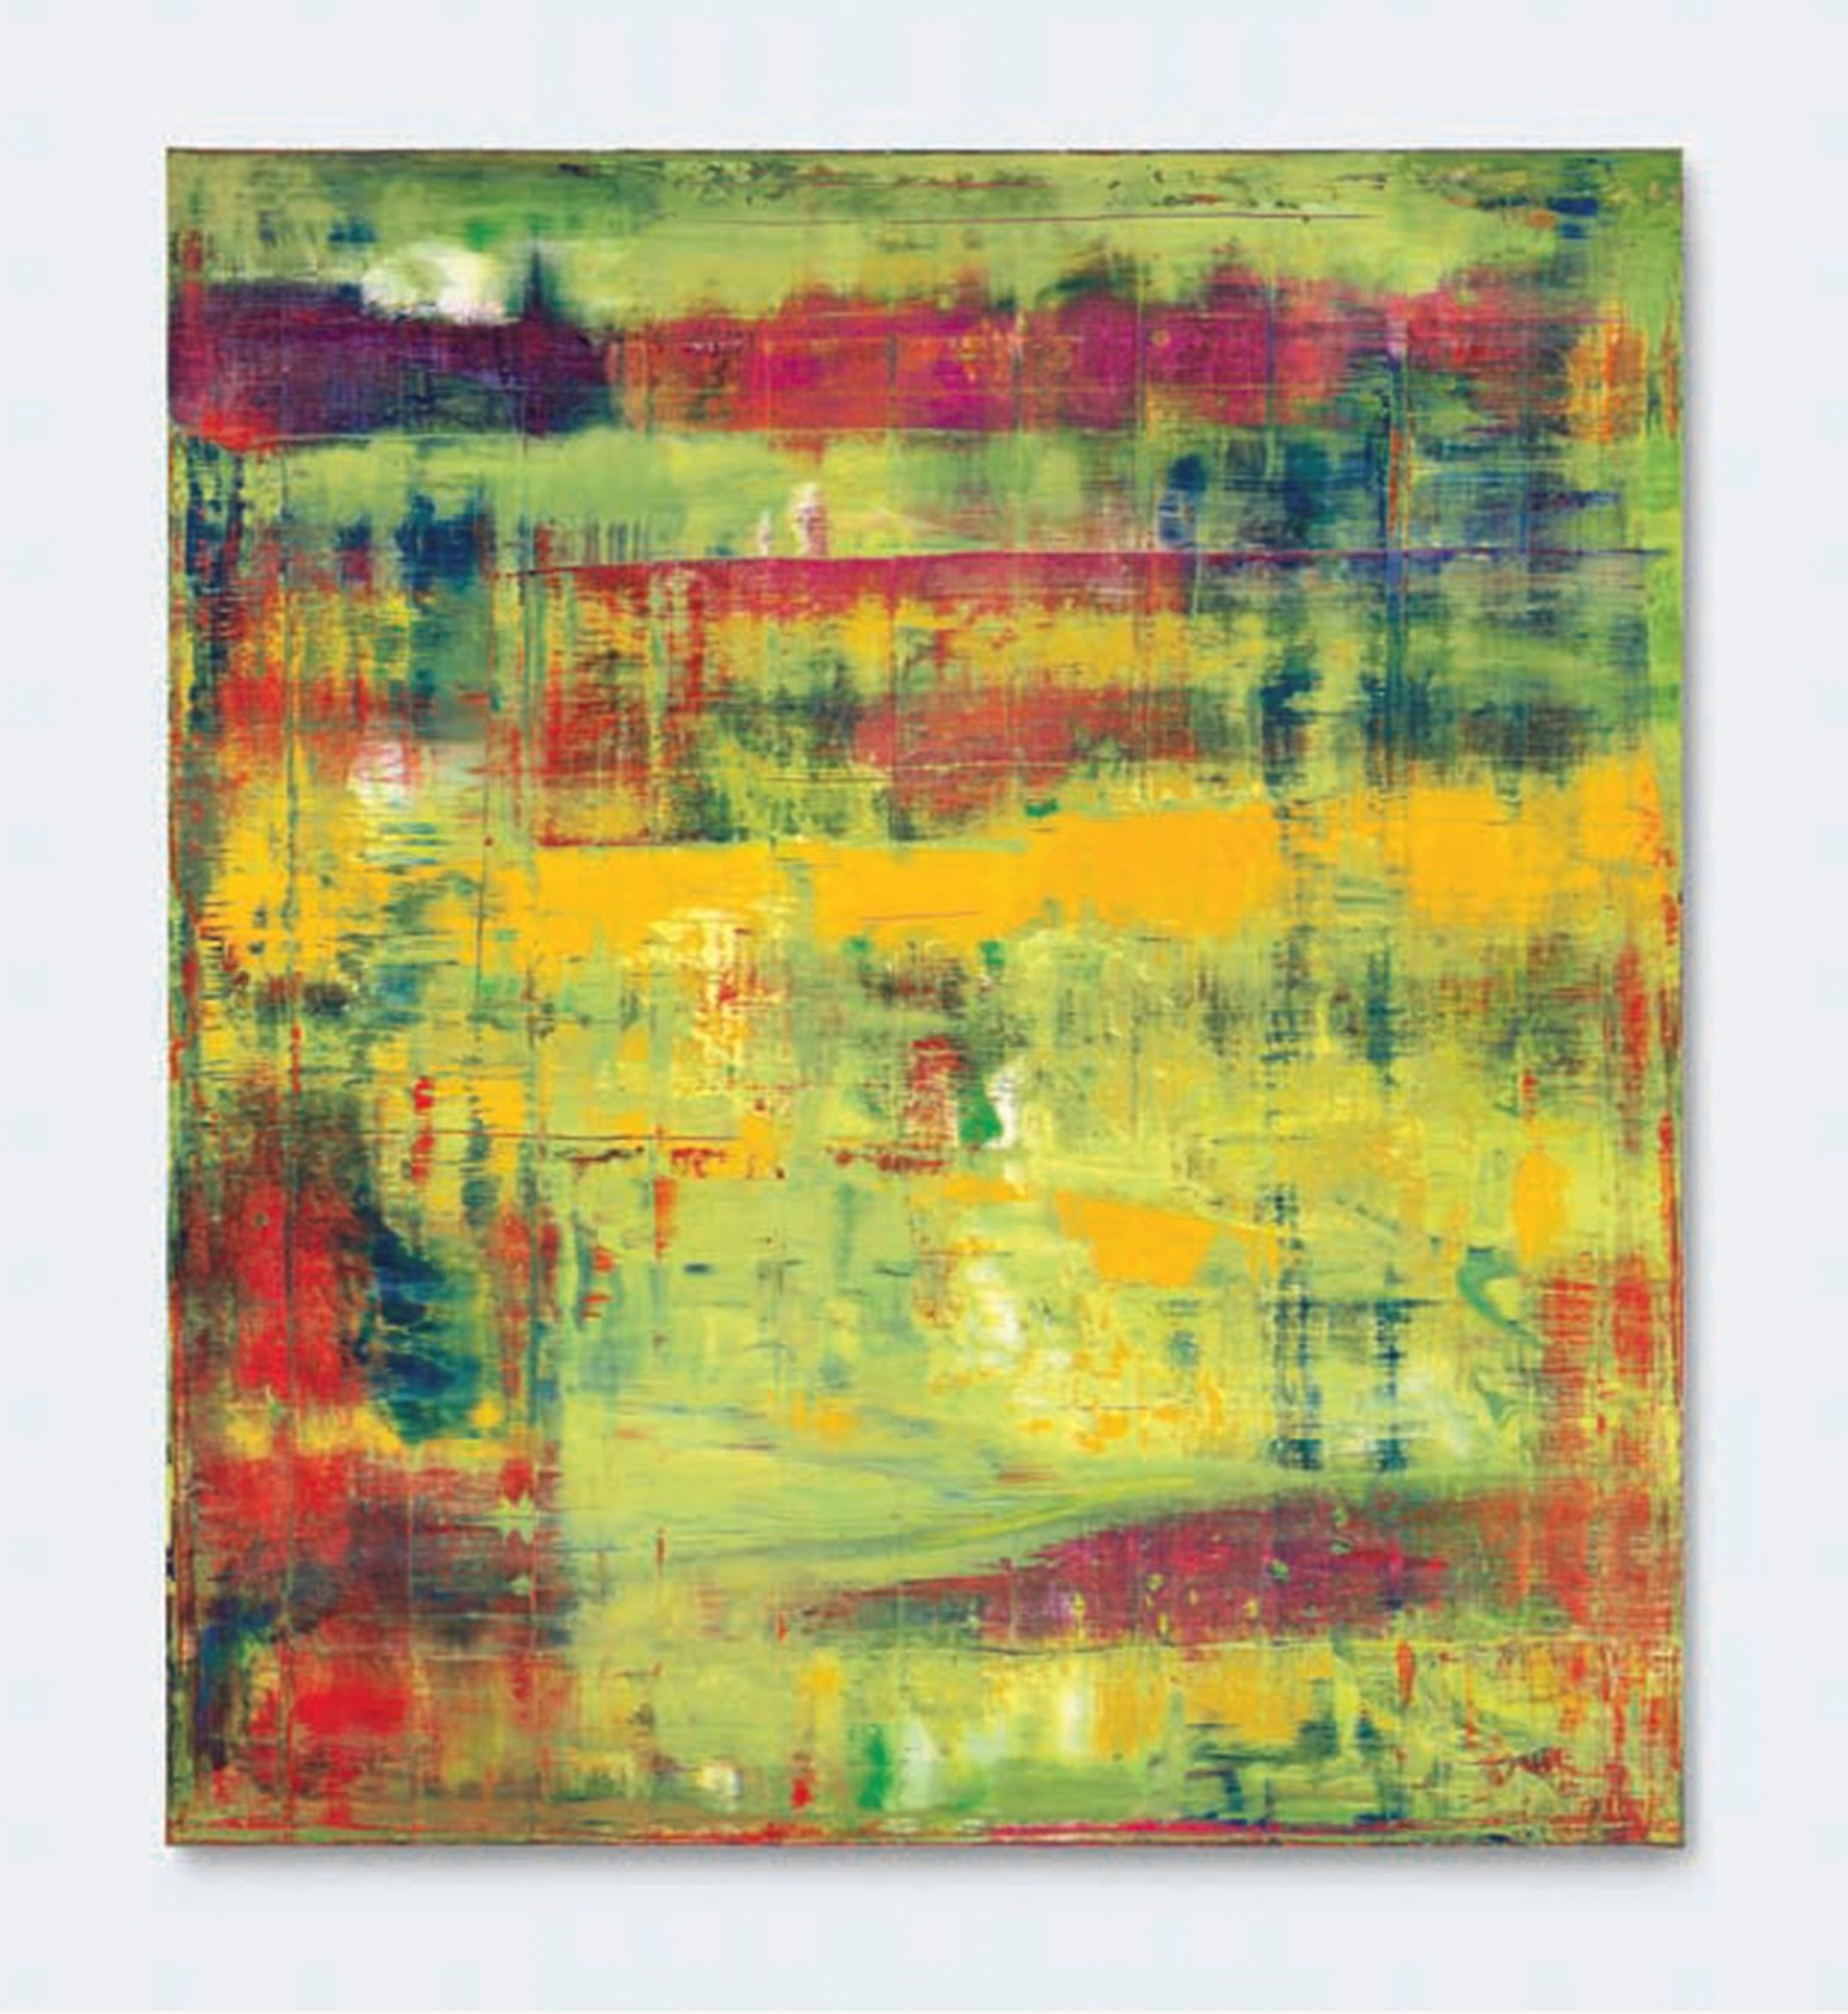 Abstract painting by Gerhard Richter, depicting overlapping, textural layers of yellow, light green, red, and deep blue. 